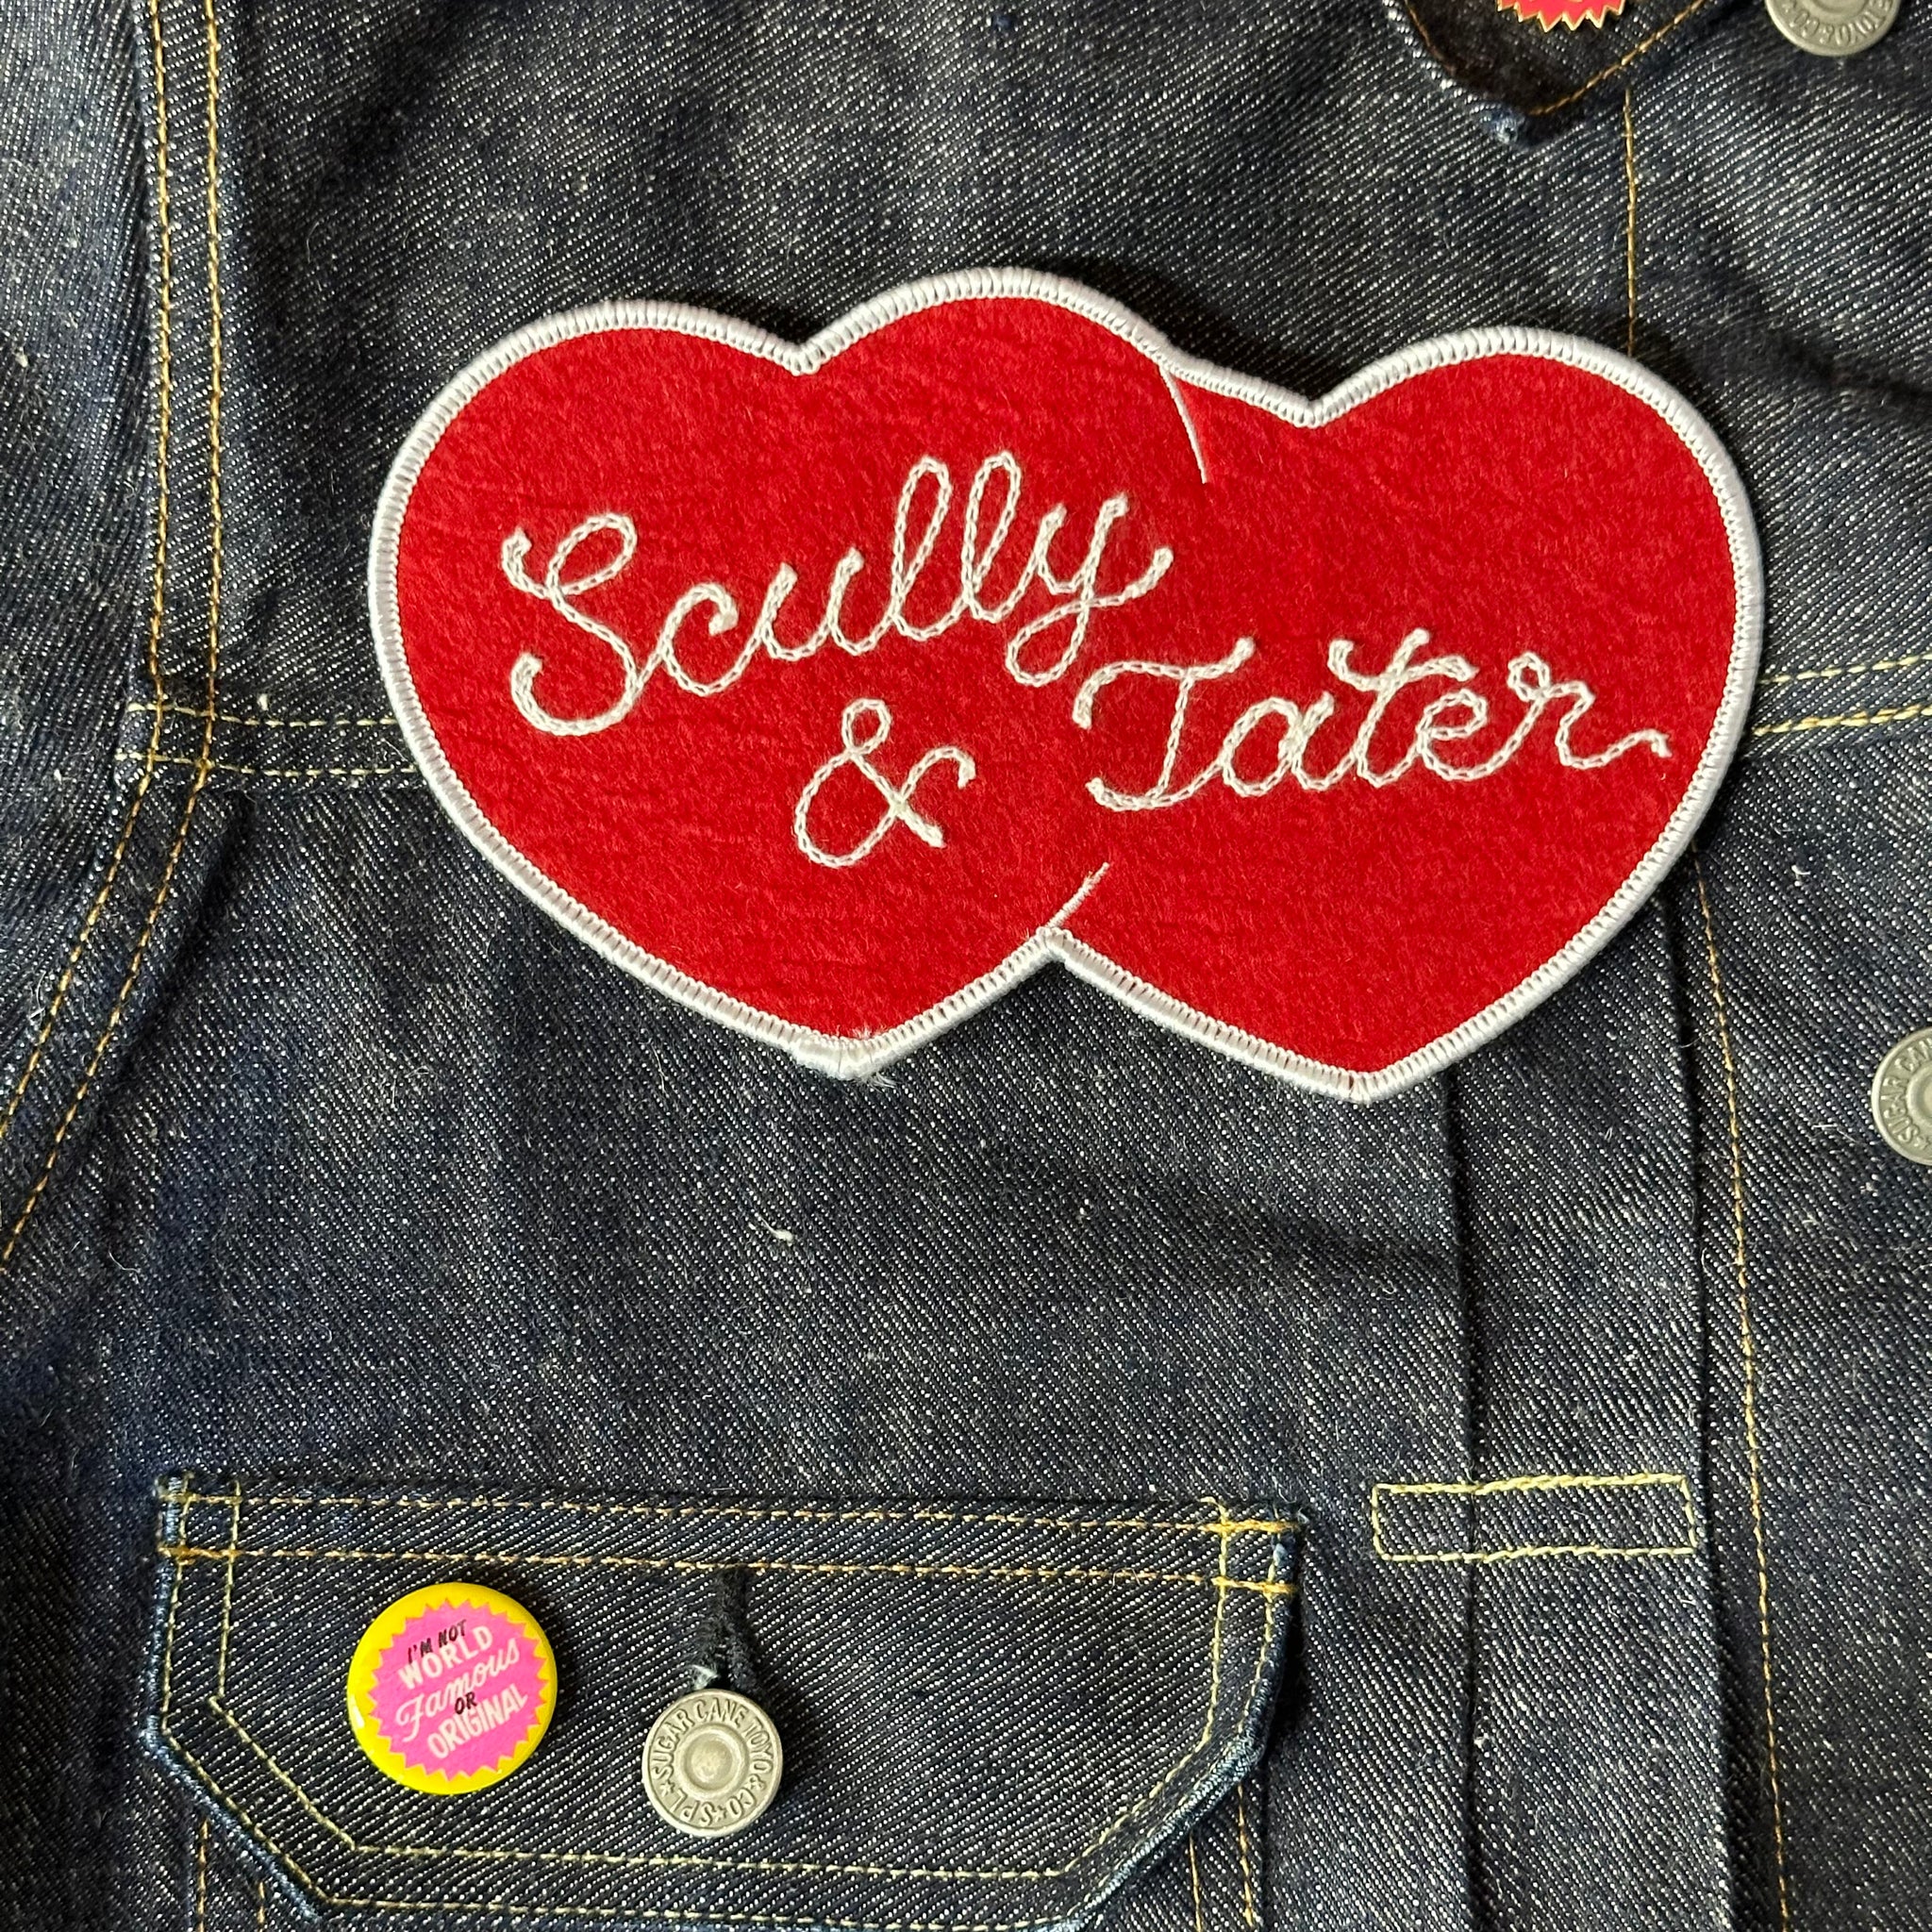 Jacket Patches, Personalized Name Patches